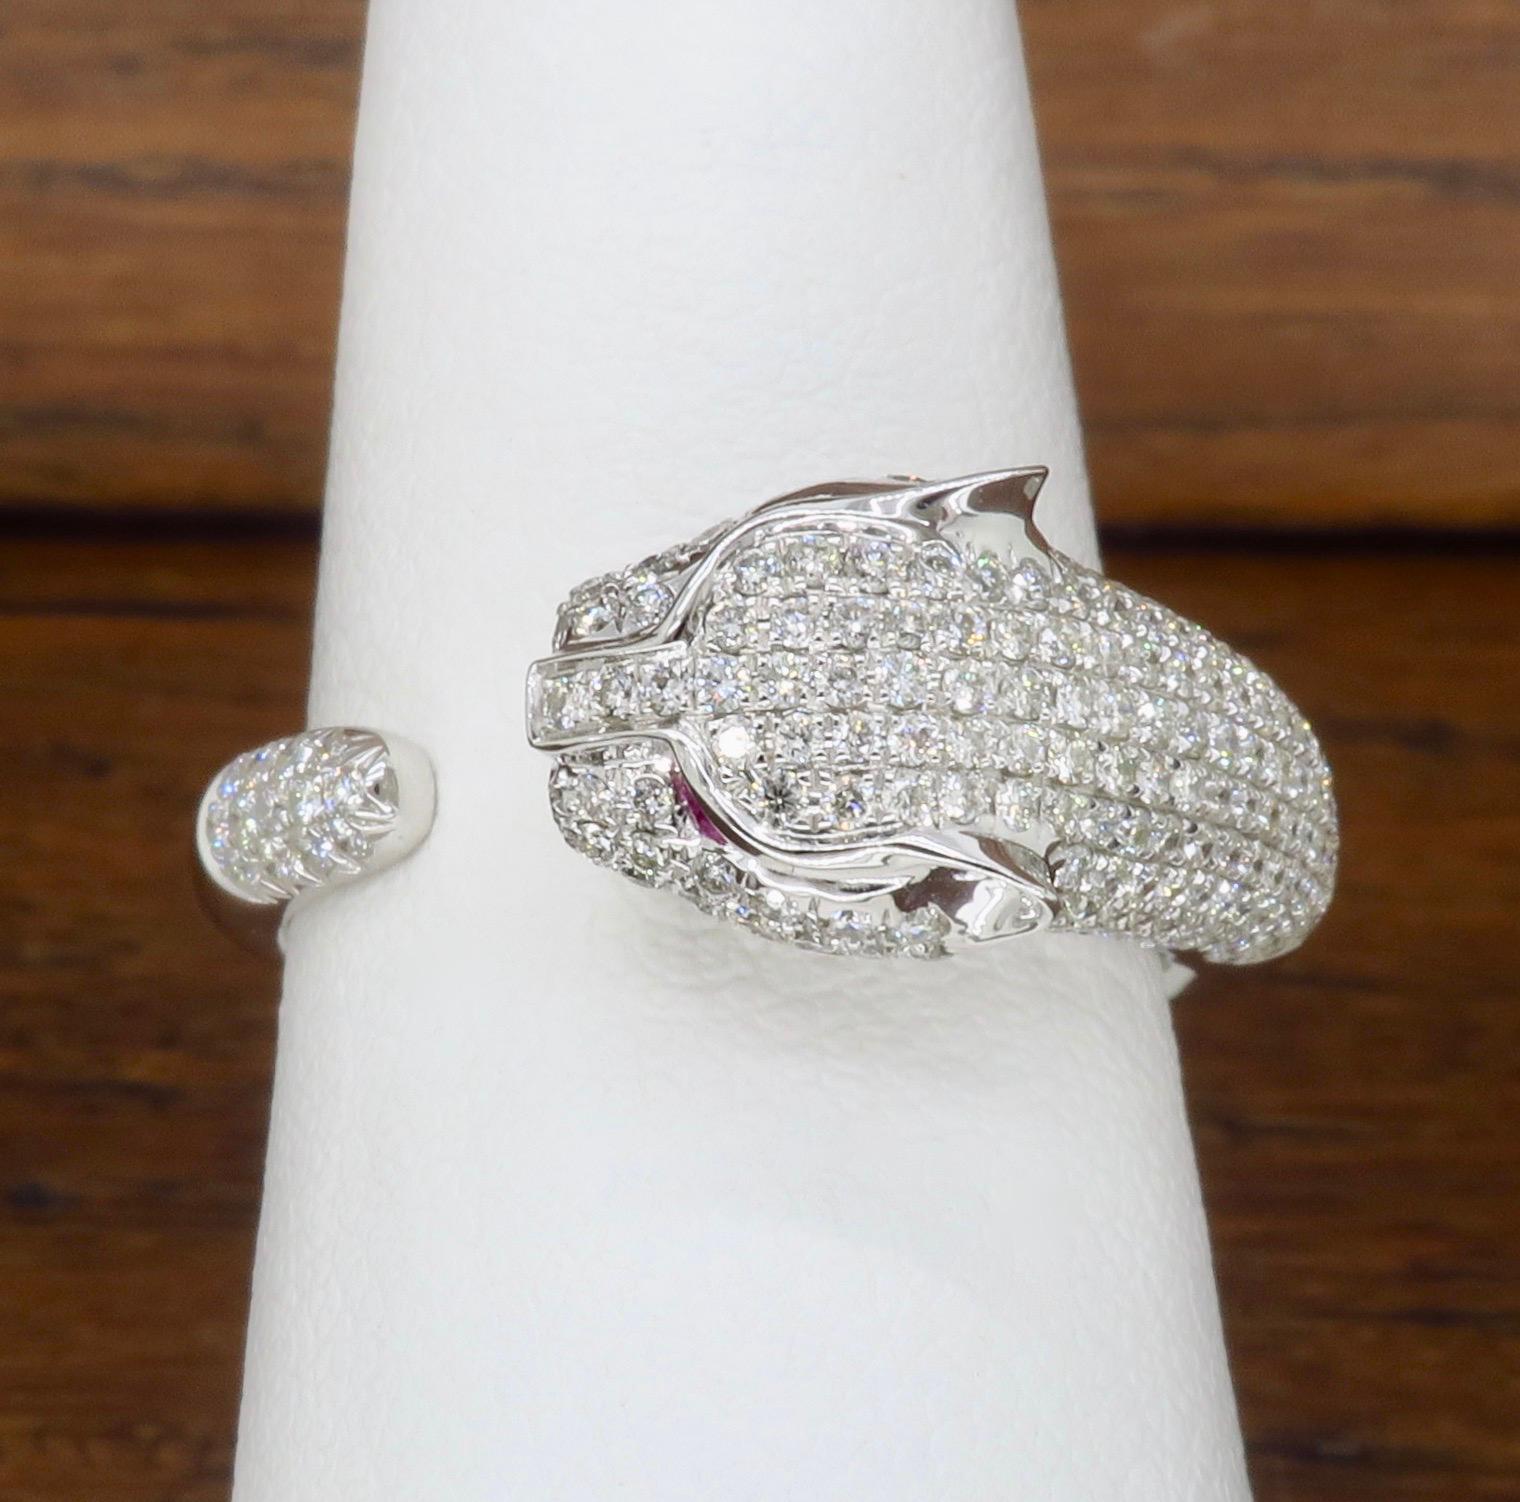 Panther Diamond and Ruby Ring Made in 18 Karat White Gold 1